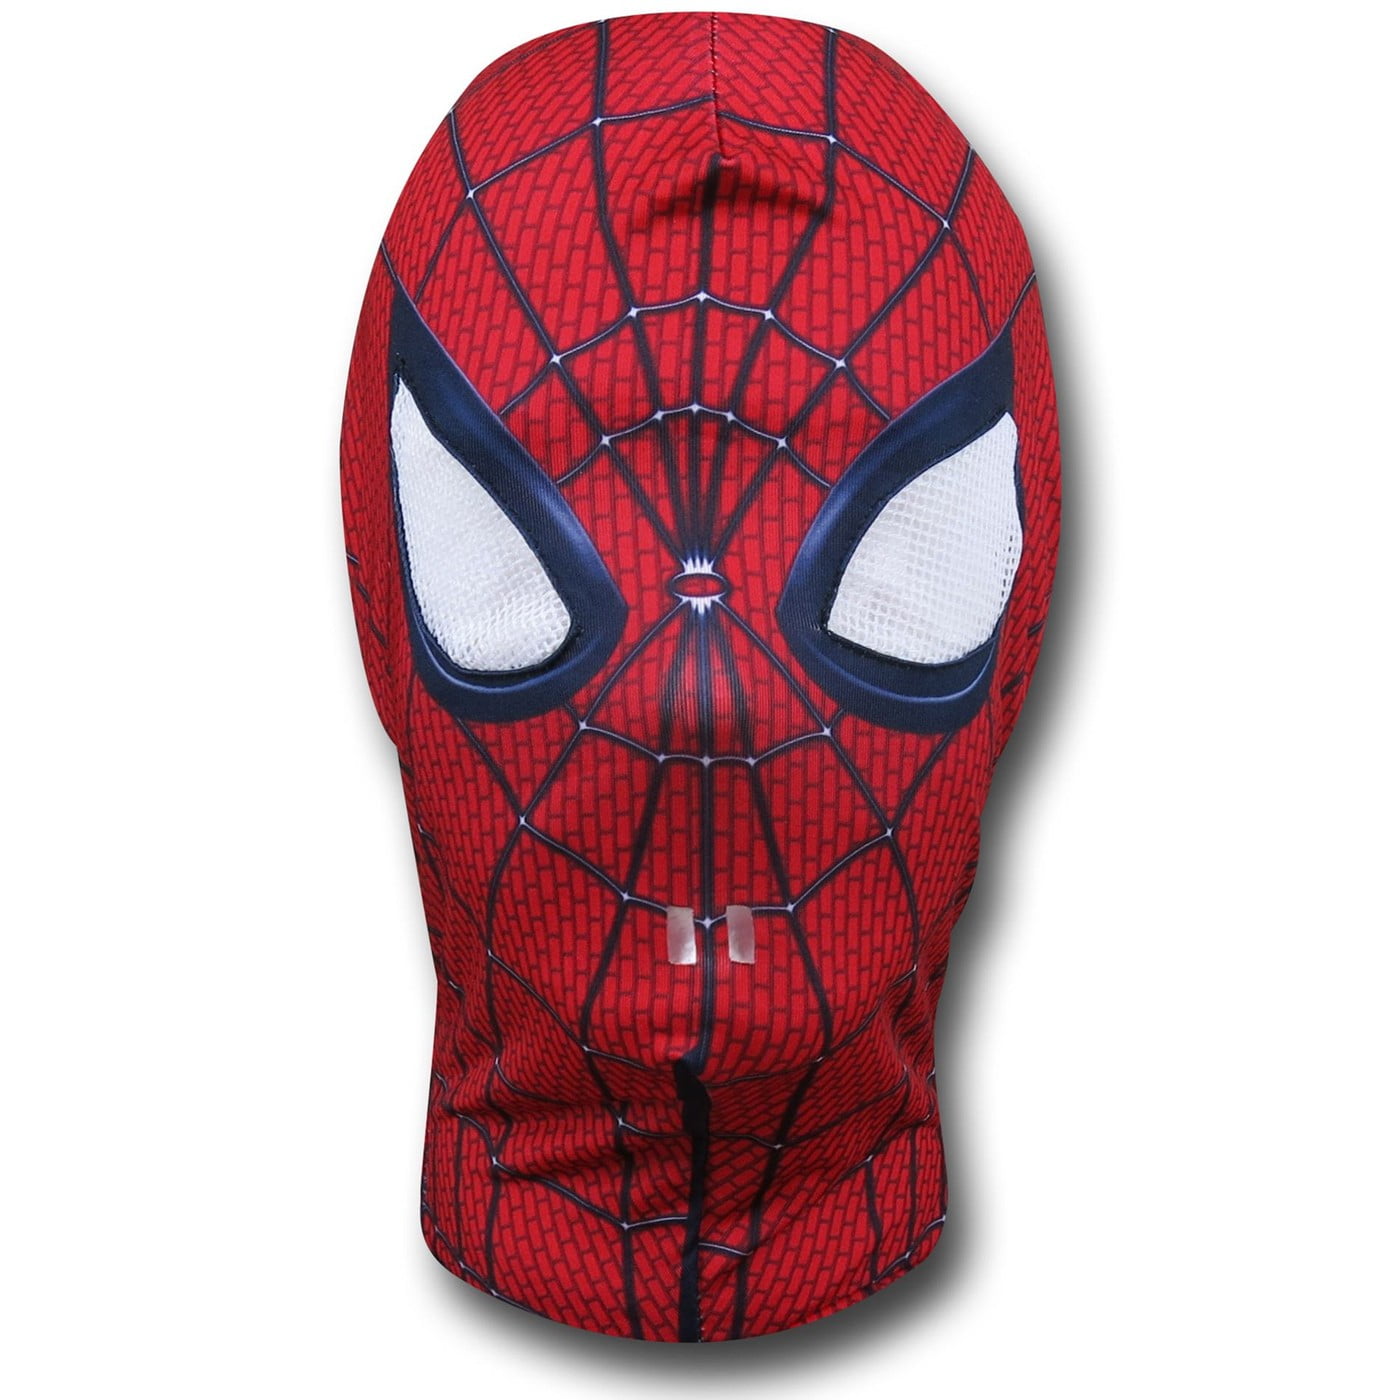 Spider-Man:Homecoming Spiderman Red mask Cosplay Costume Mask party dress Props 